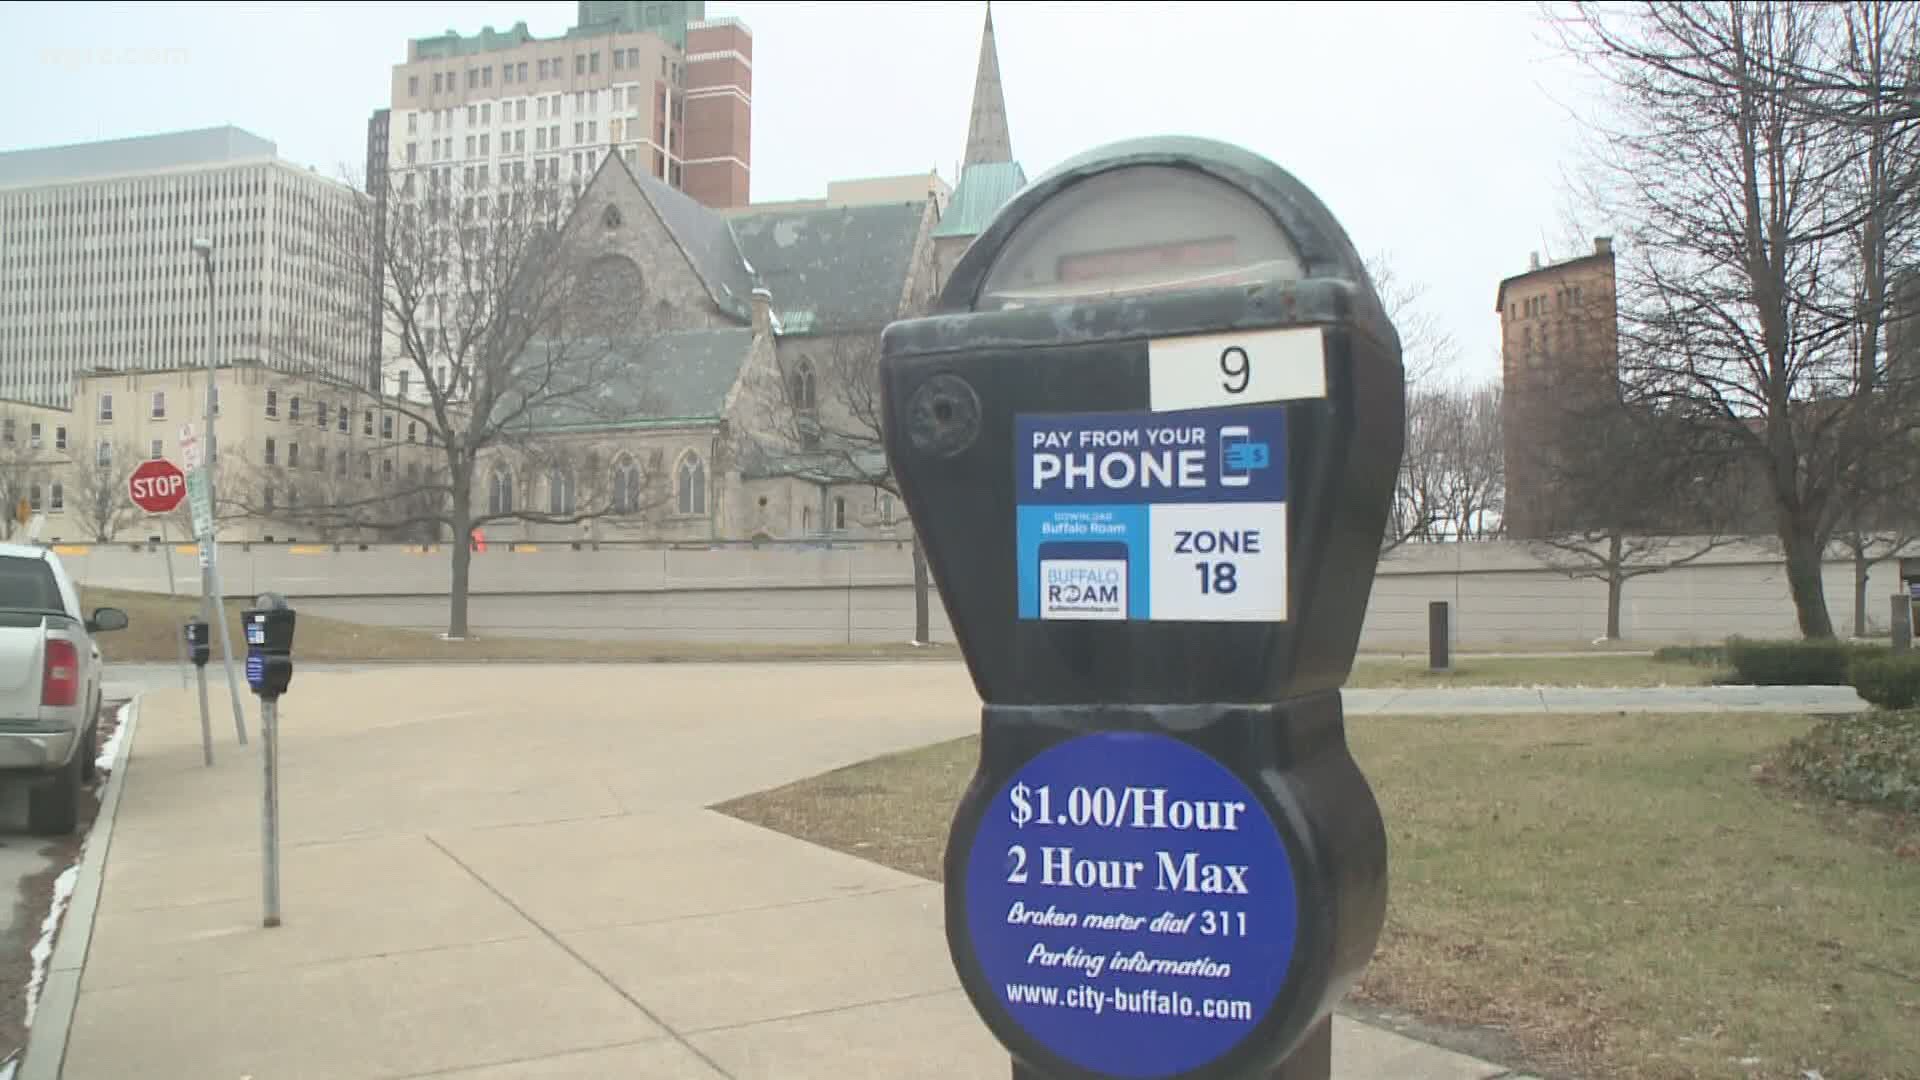 Metered parking resumes today in Buffalo